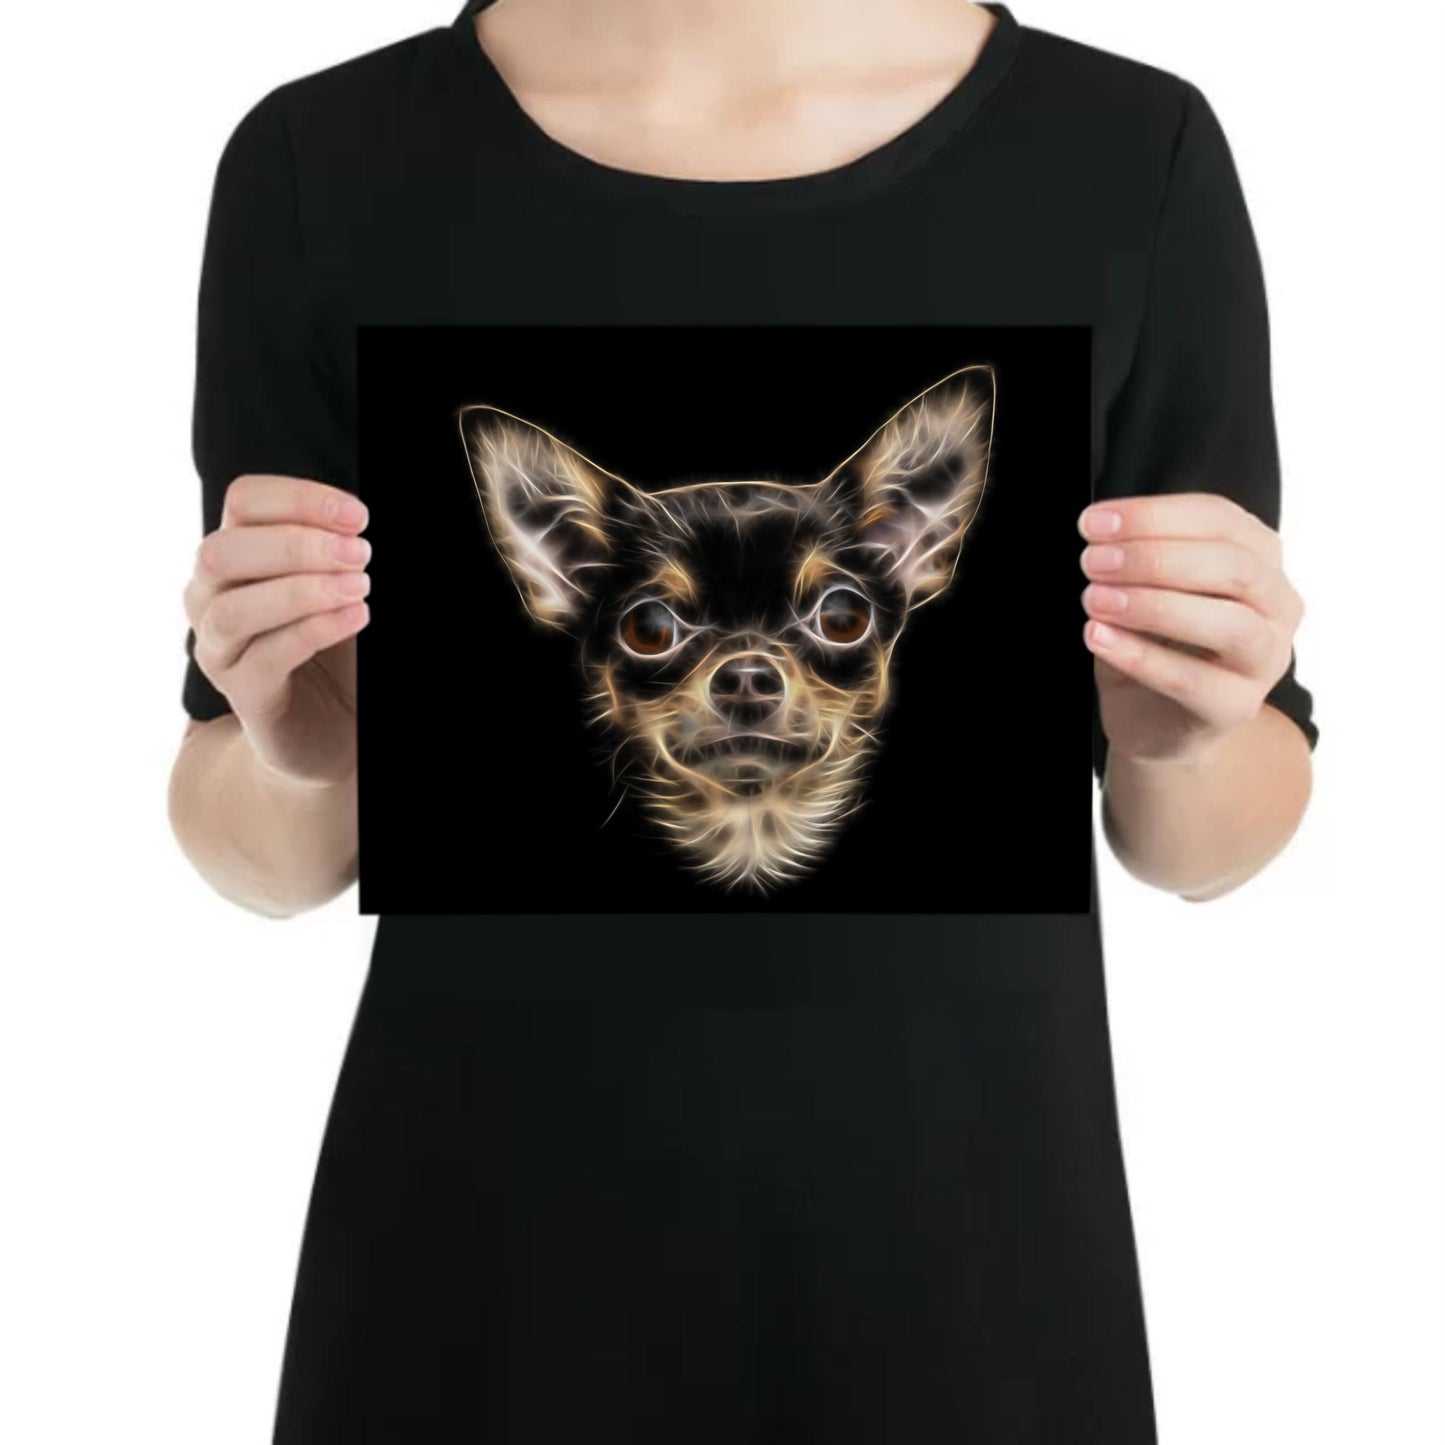 Short Haired Chocolate and Tan Chihuahua Metal Wall Plaque with Fractal Art Design.